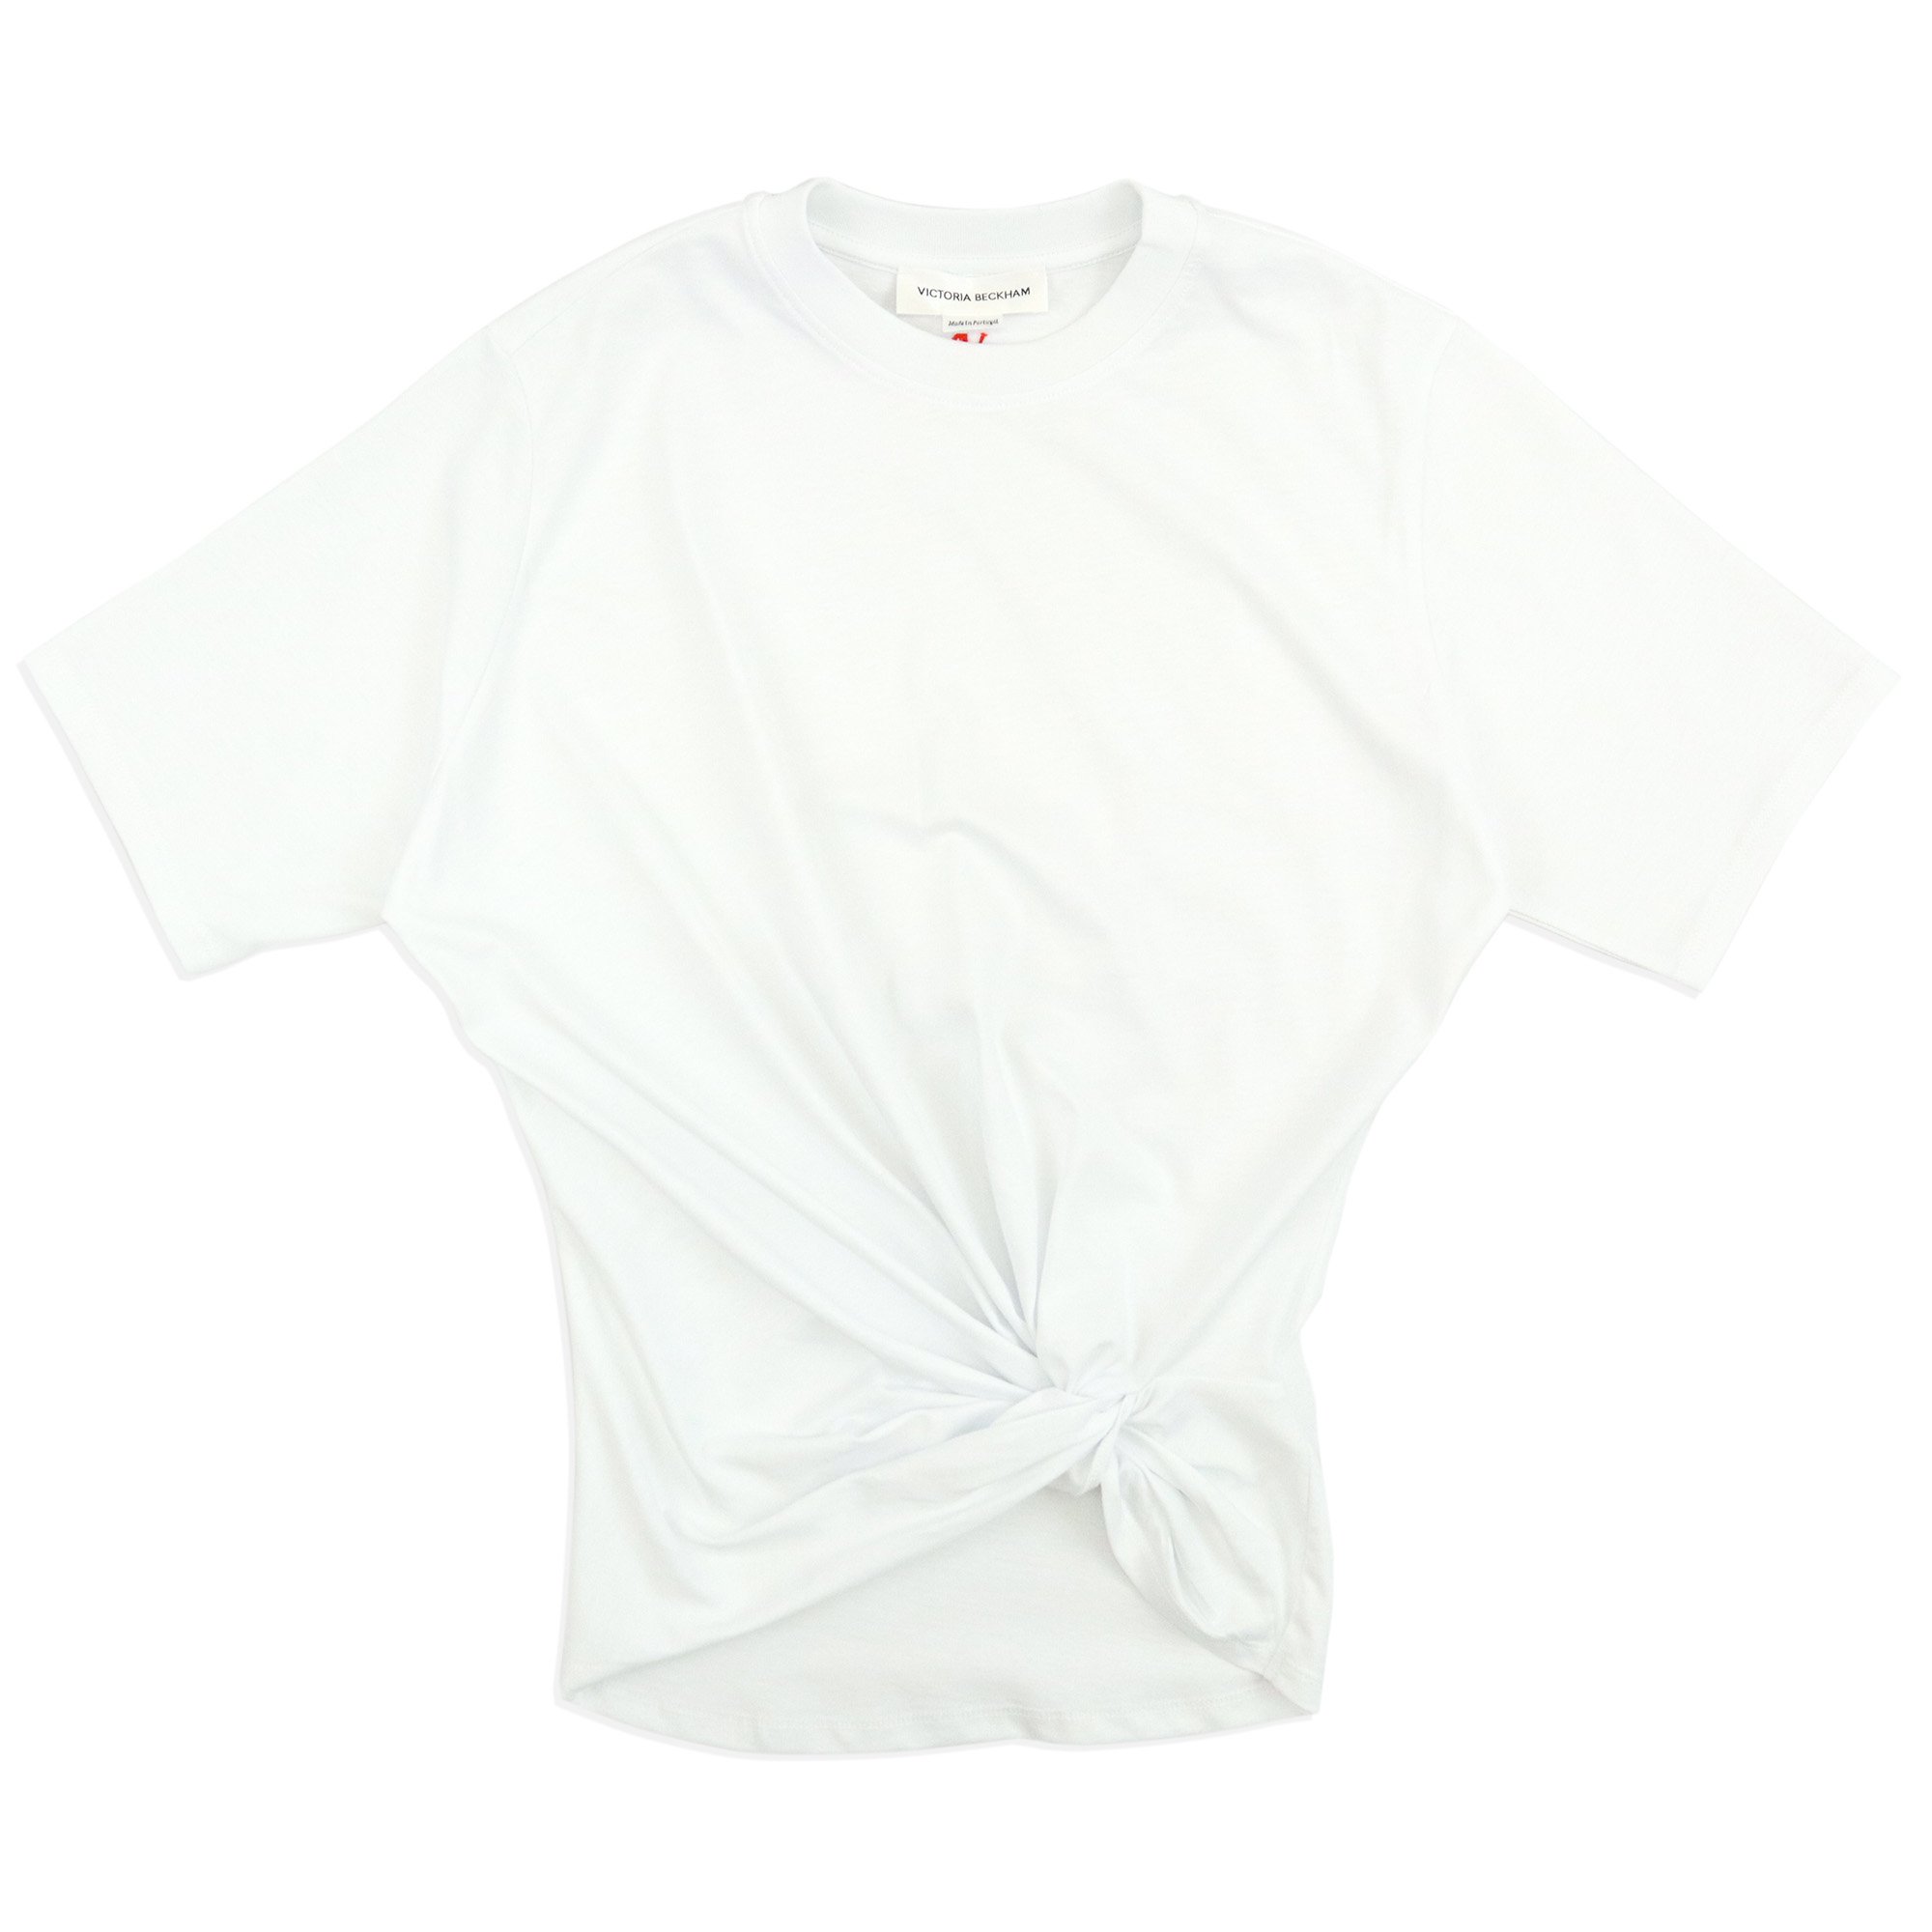 <img class='new_mark_img1' src='https://img.shop-pro.jp/img/new/icons47.gif' style='border:none;display:inline;margin:0px;padding:0px;width:auto;' />VICTORIA BECKHAM KNOT DETAIL TEEWHITE